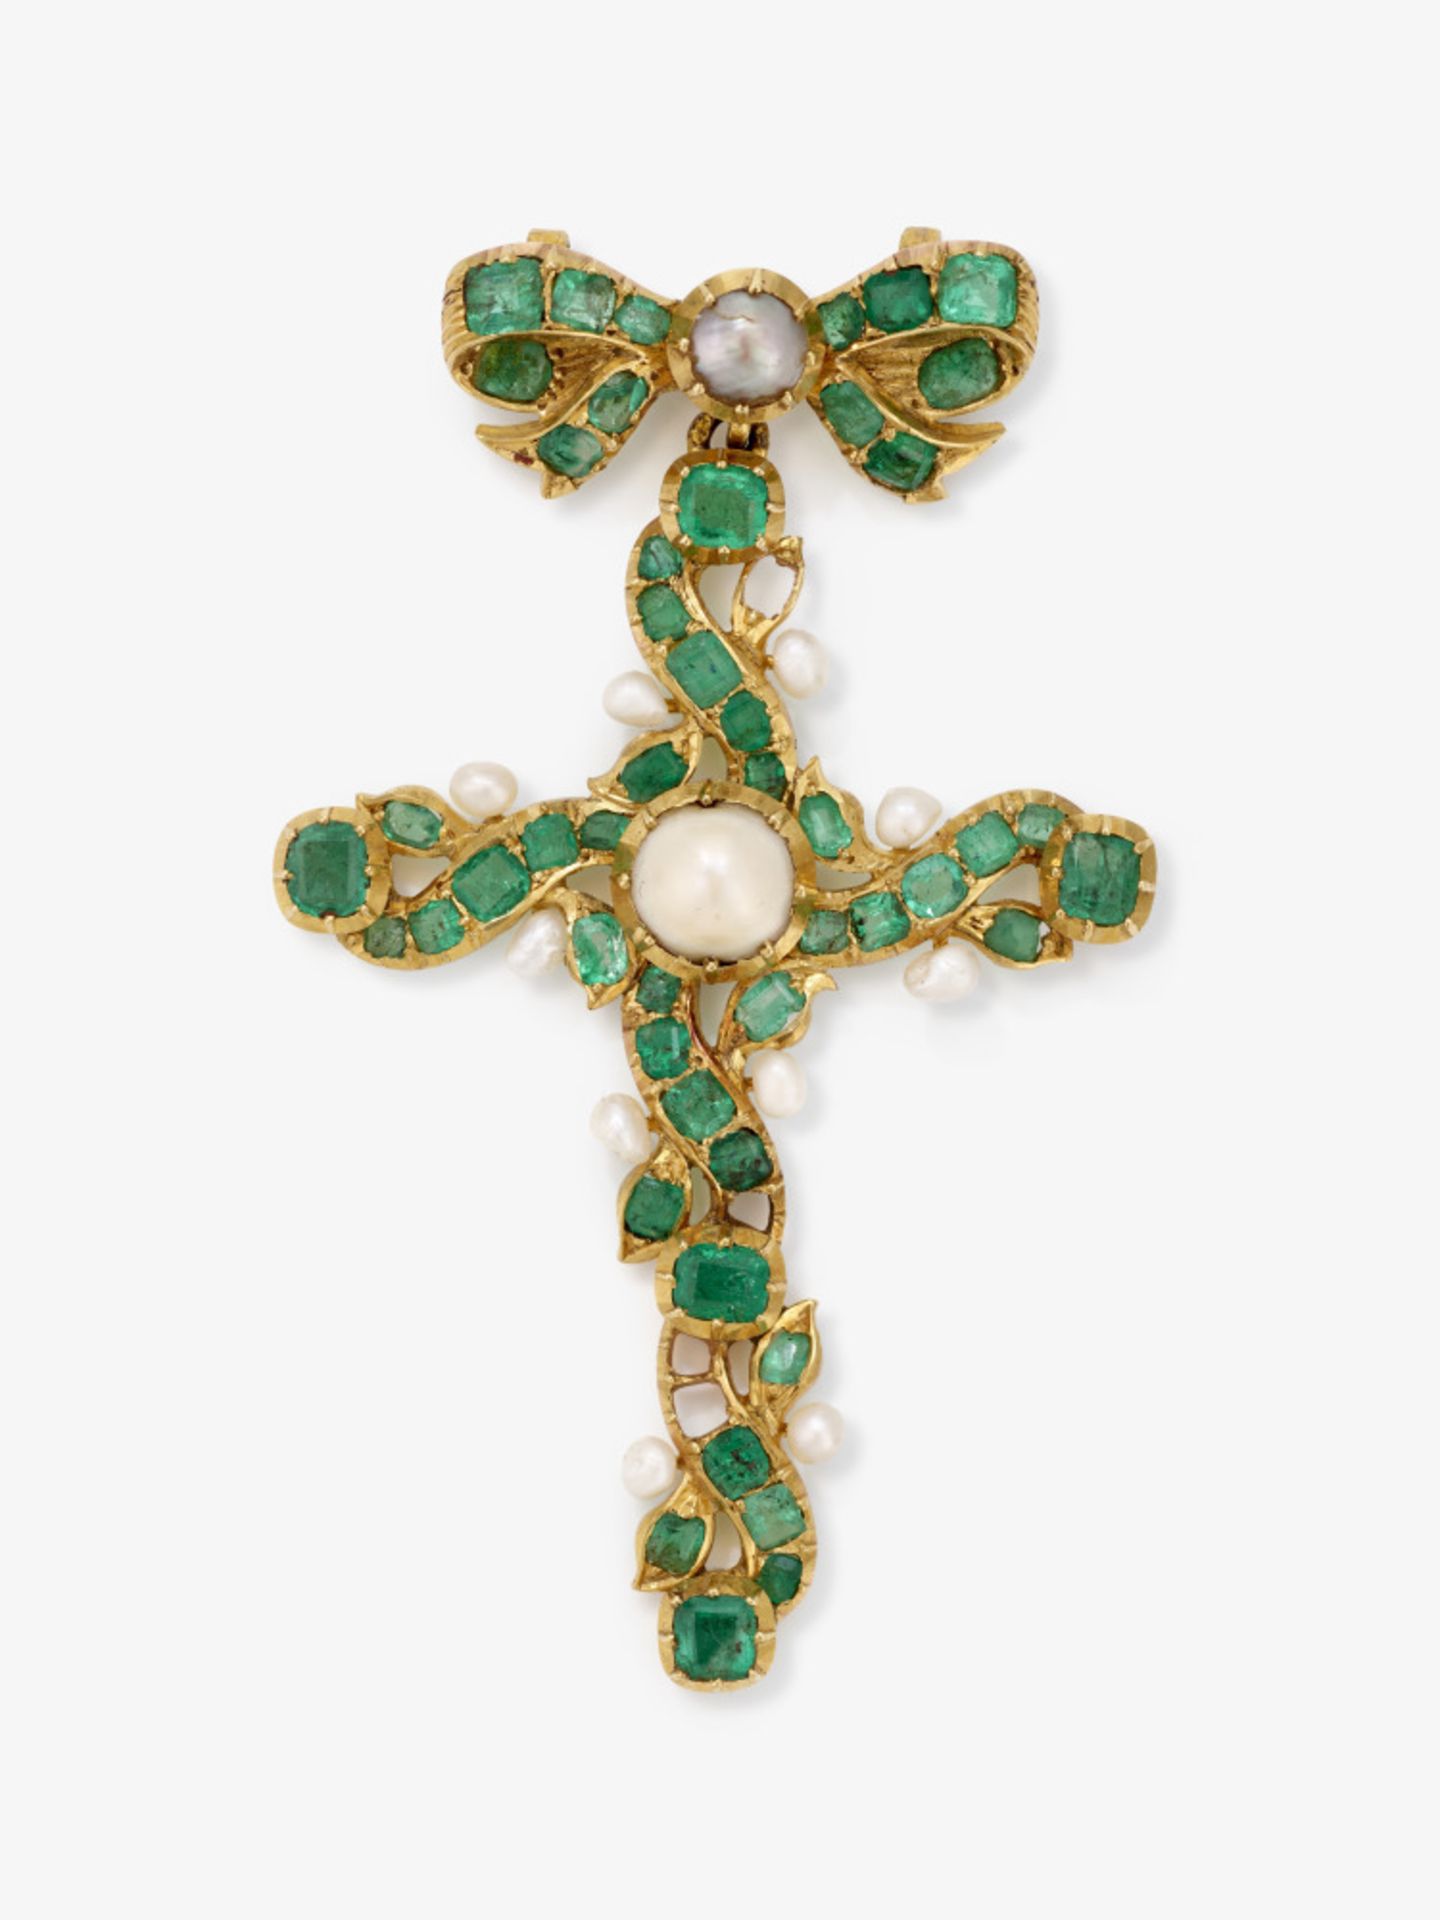 Cross pendant with emeralds and river pearls - Austria, circa 1870